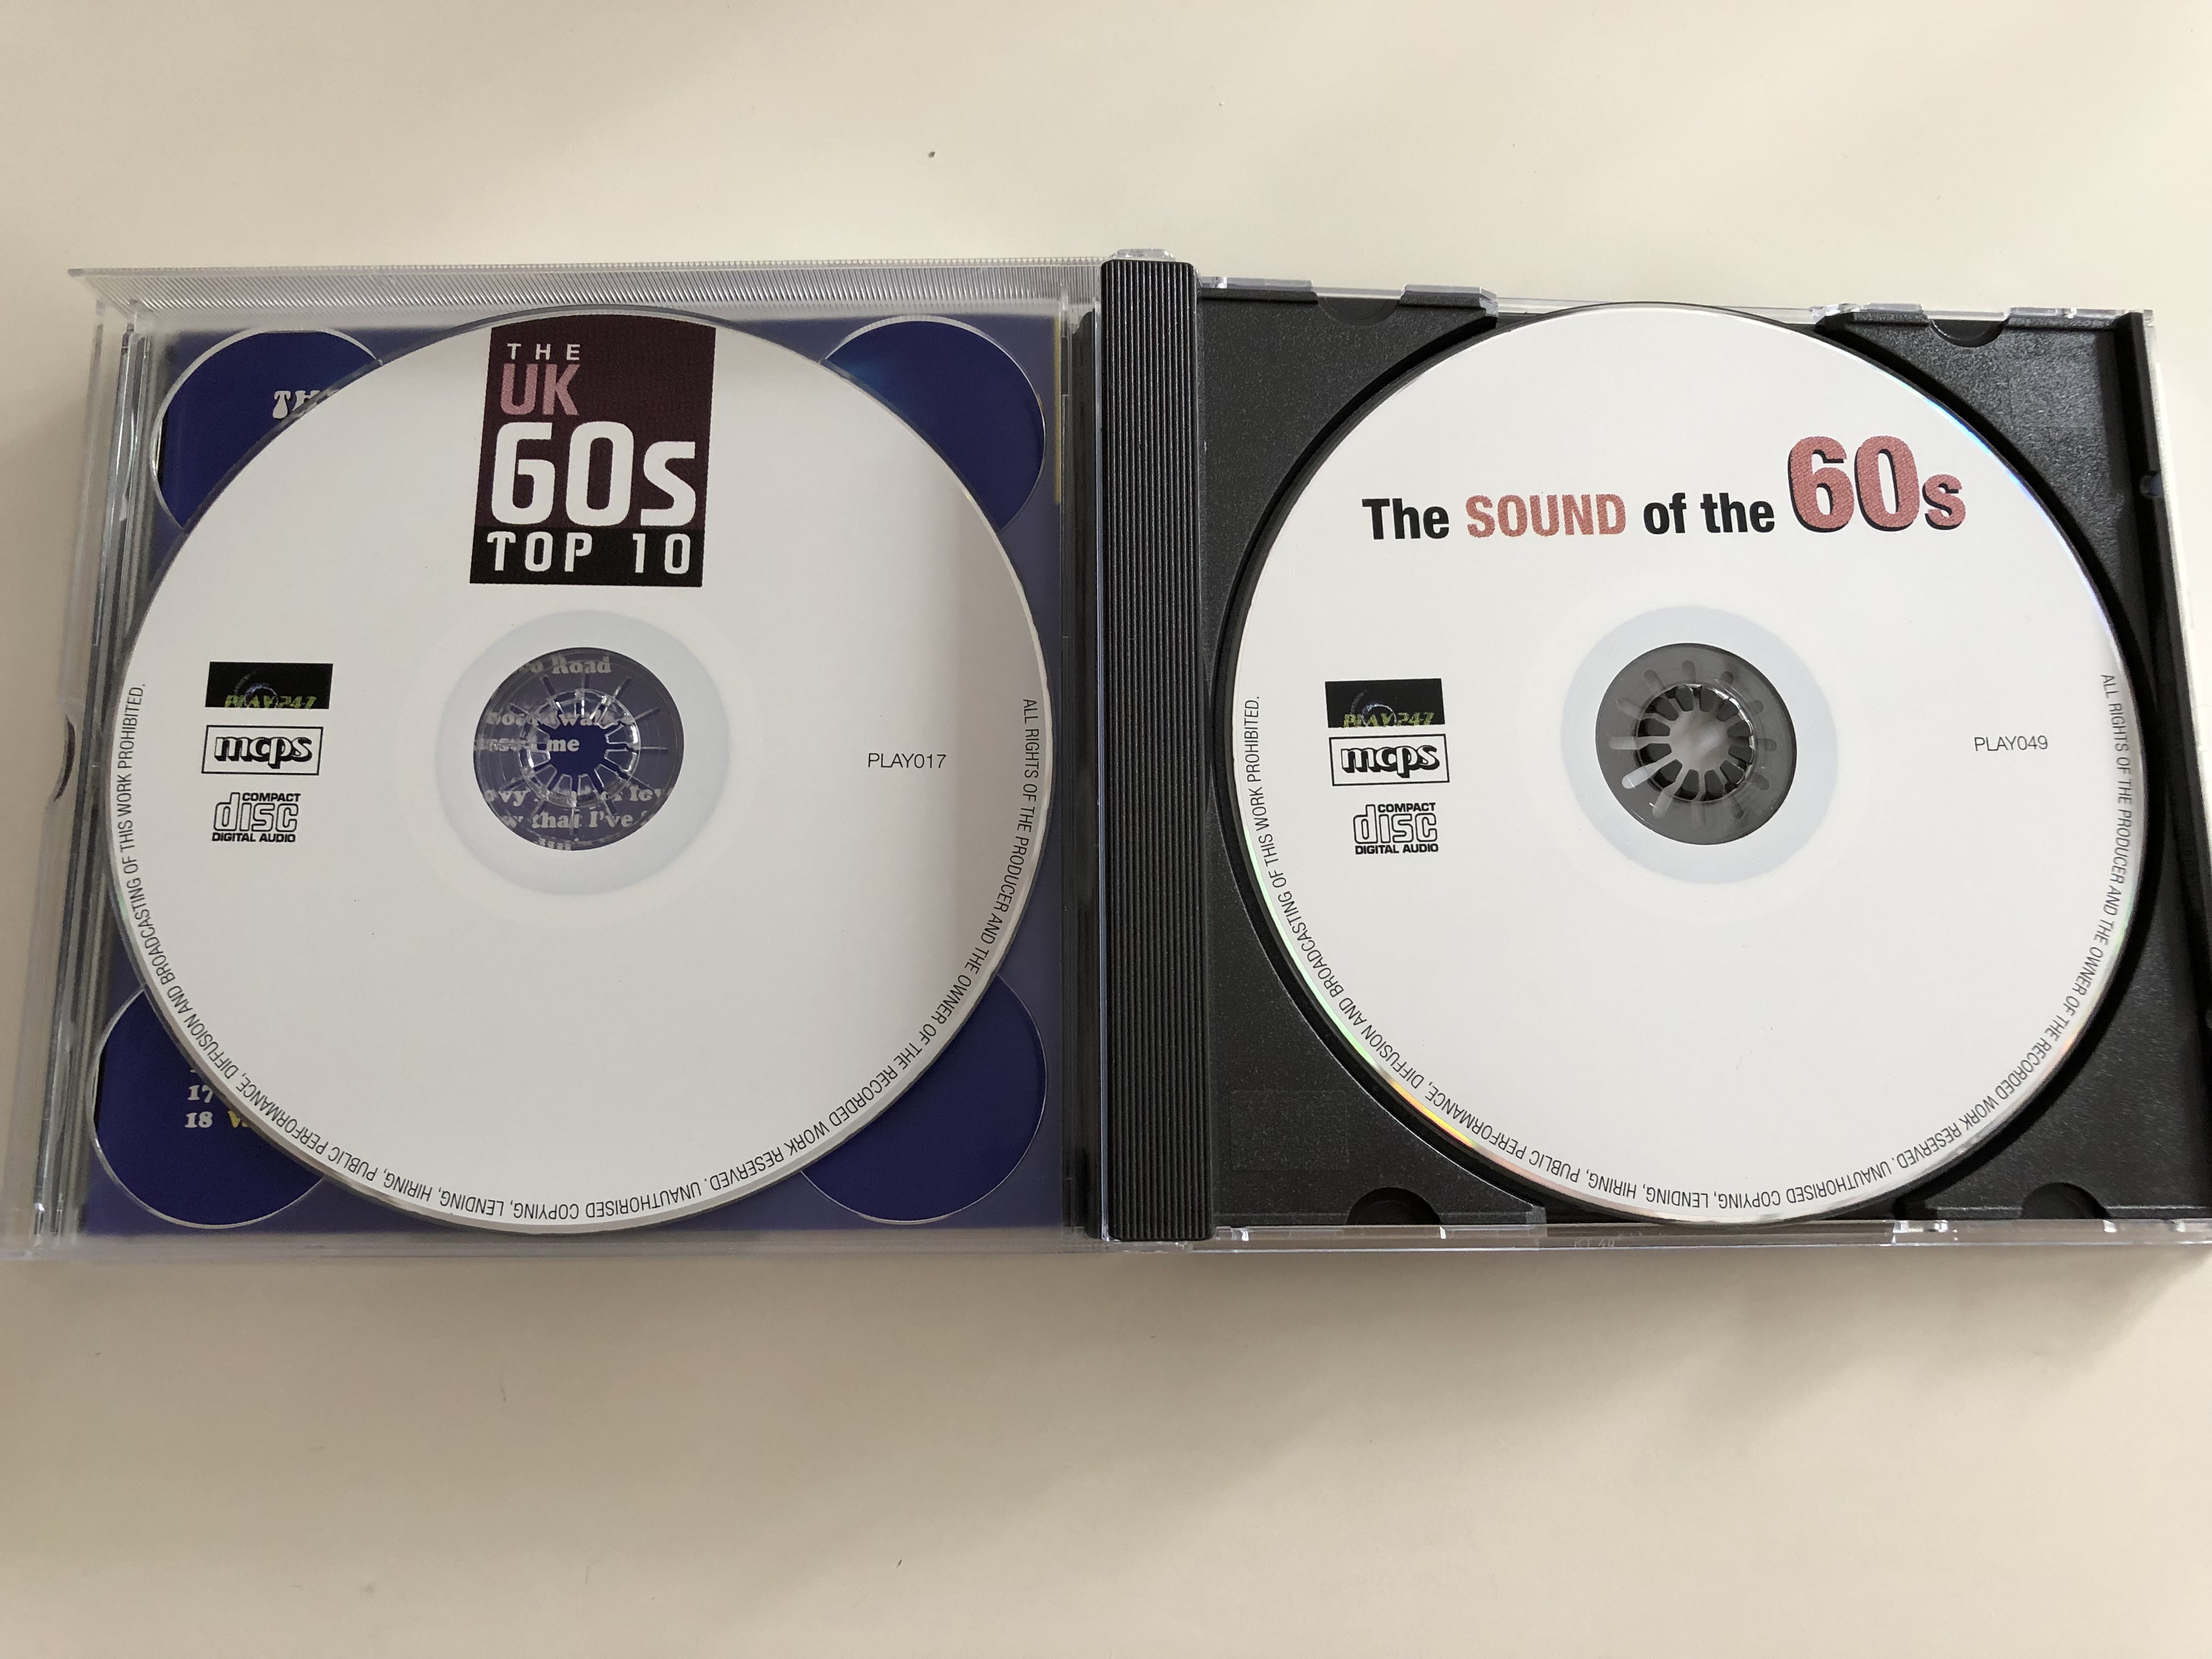 the-best-of-the-60s-the-uk-top-10-of-the-60s-the-sound-of-the-60s-3x-audio-cd-set-2008-play-3-003-6-.jpg